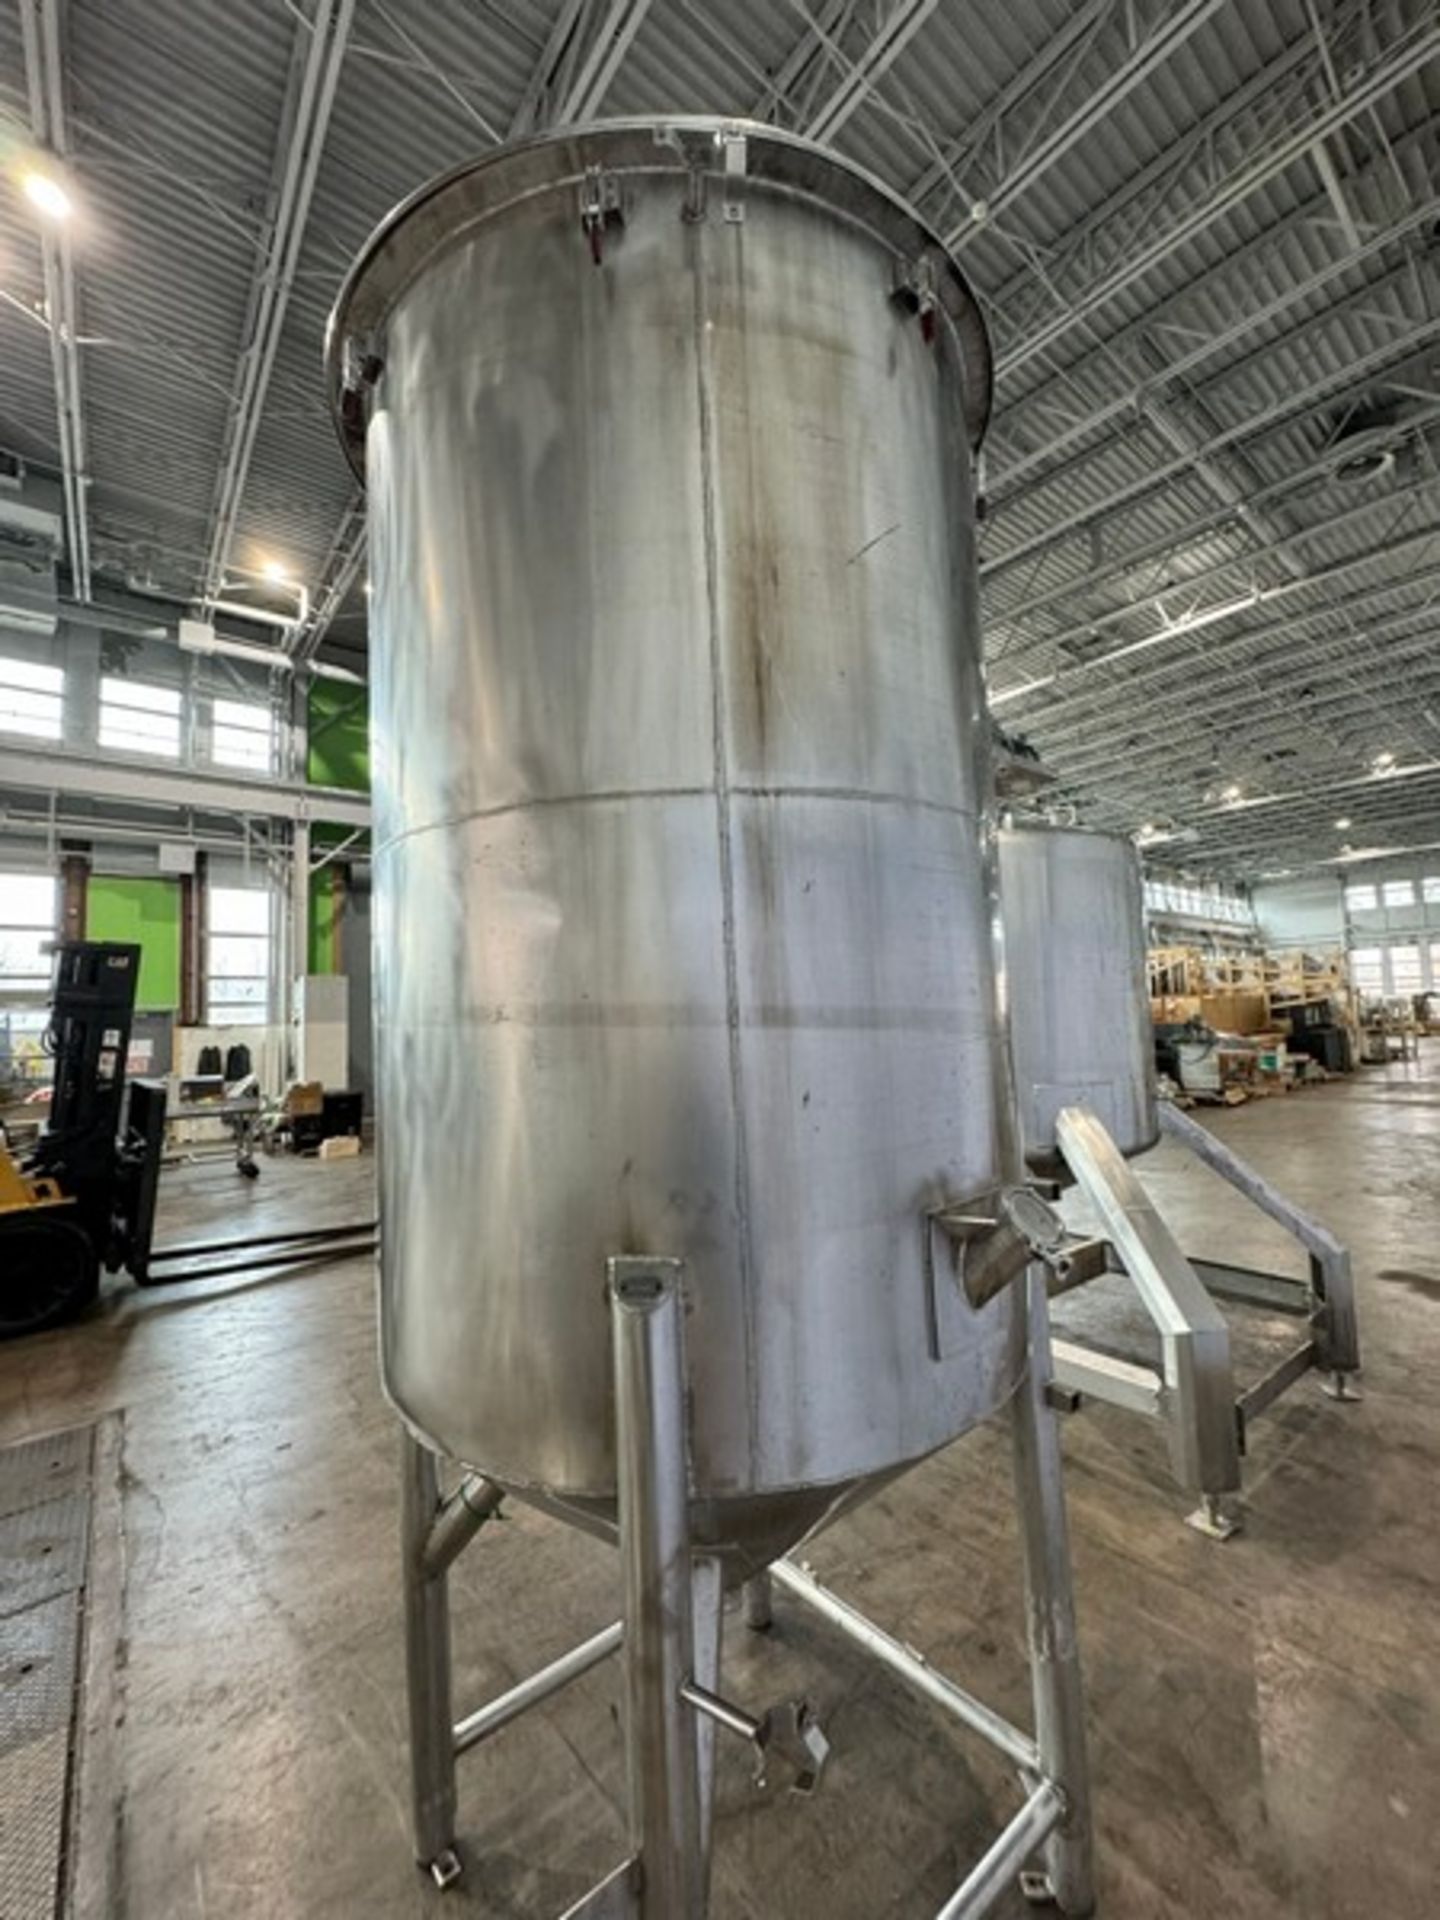 Aprox. 500 Gal. S/S Single Wall Tank, Vessel Dims.: Aprox. 70" Tall x 48" Dia., with Cone Bottom, - Image 6 of 8